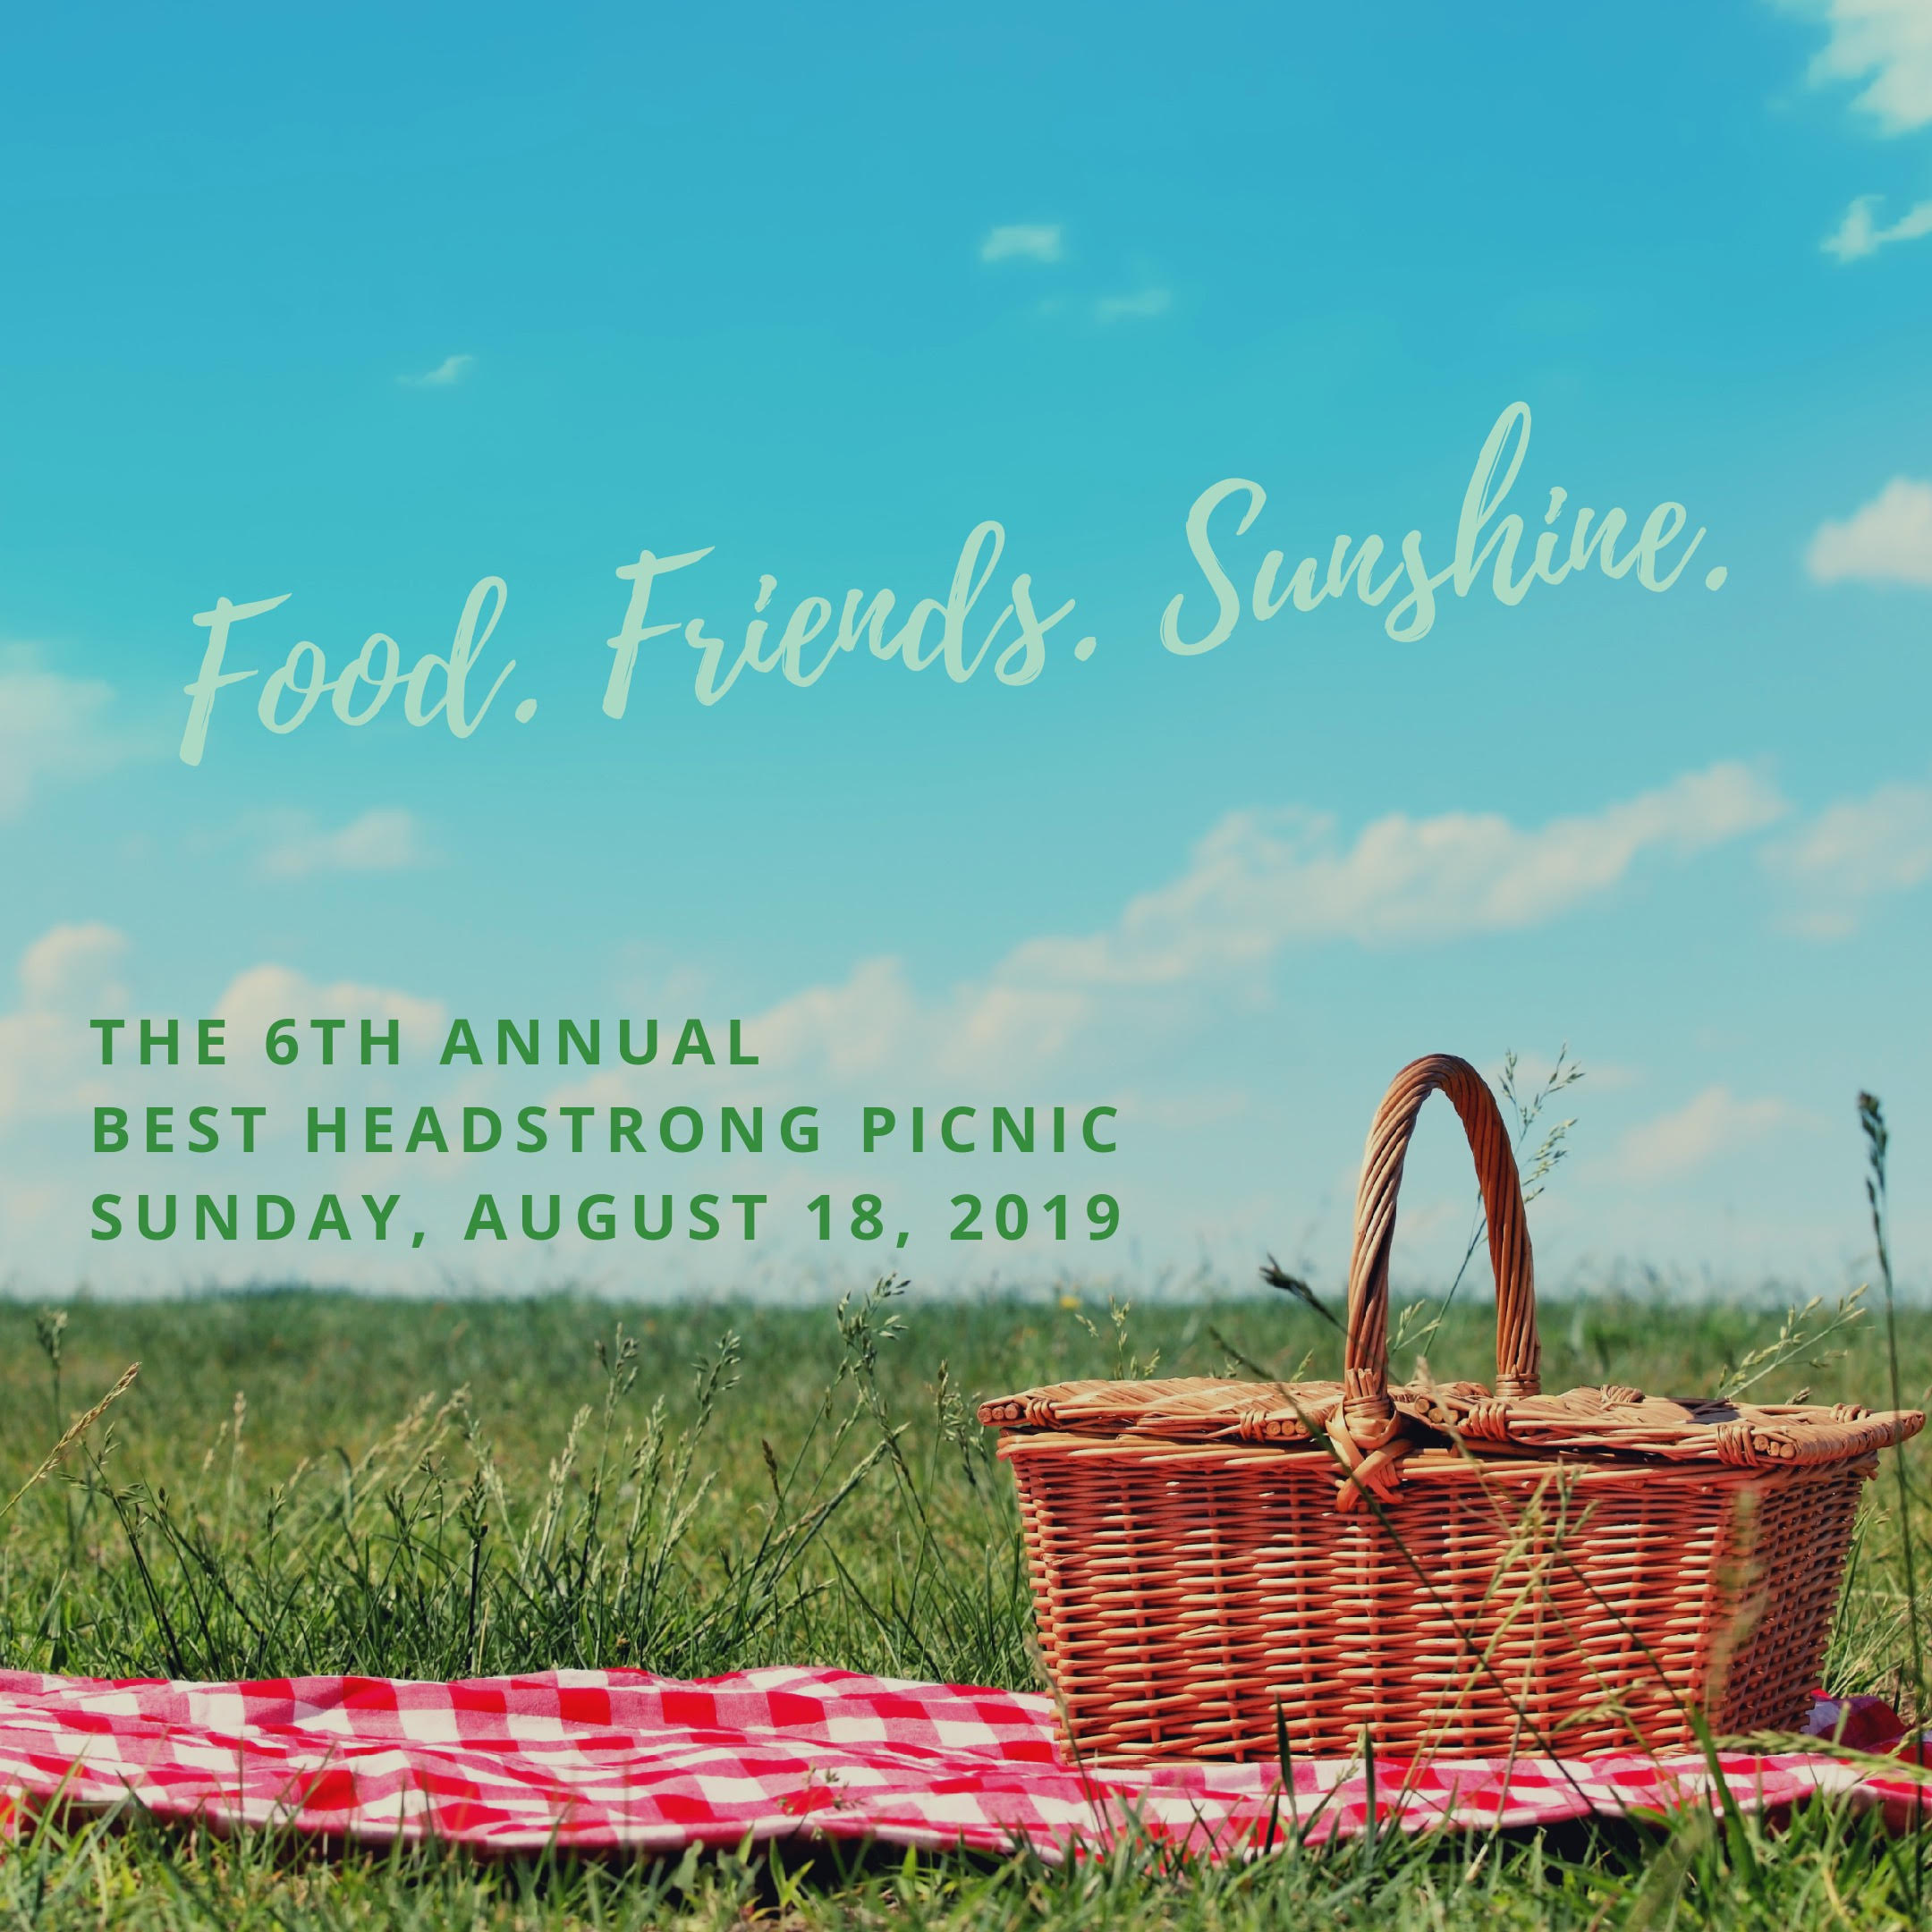 Save the Date: The 6th Annual BEST HeadStrong Picnic